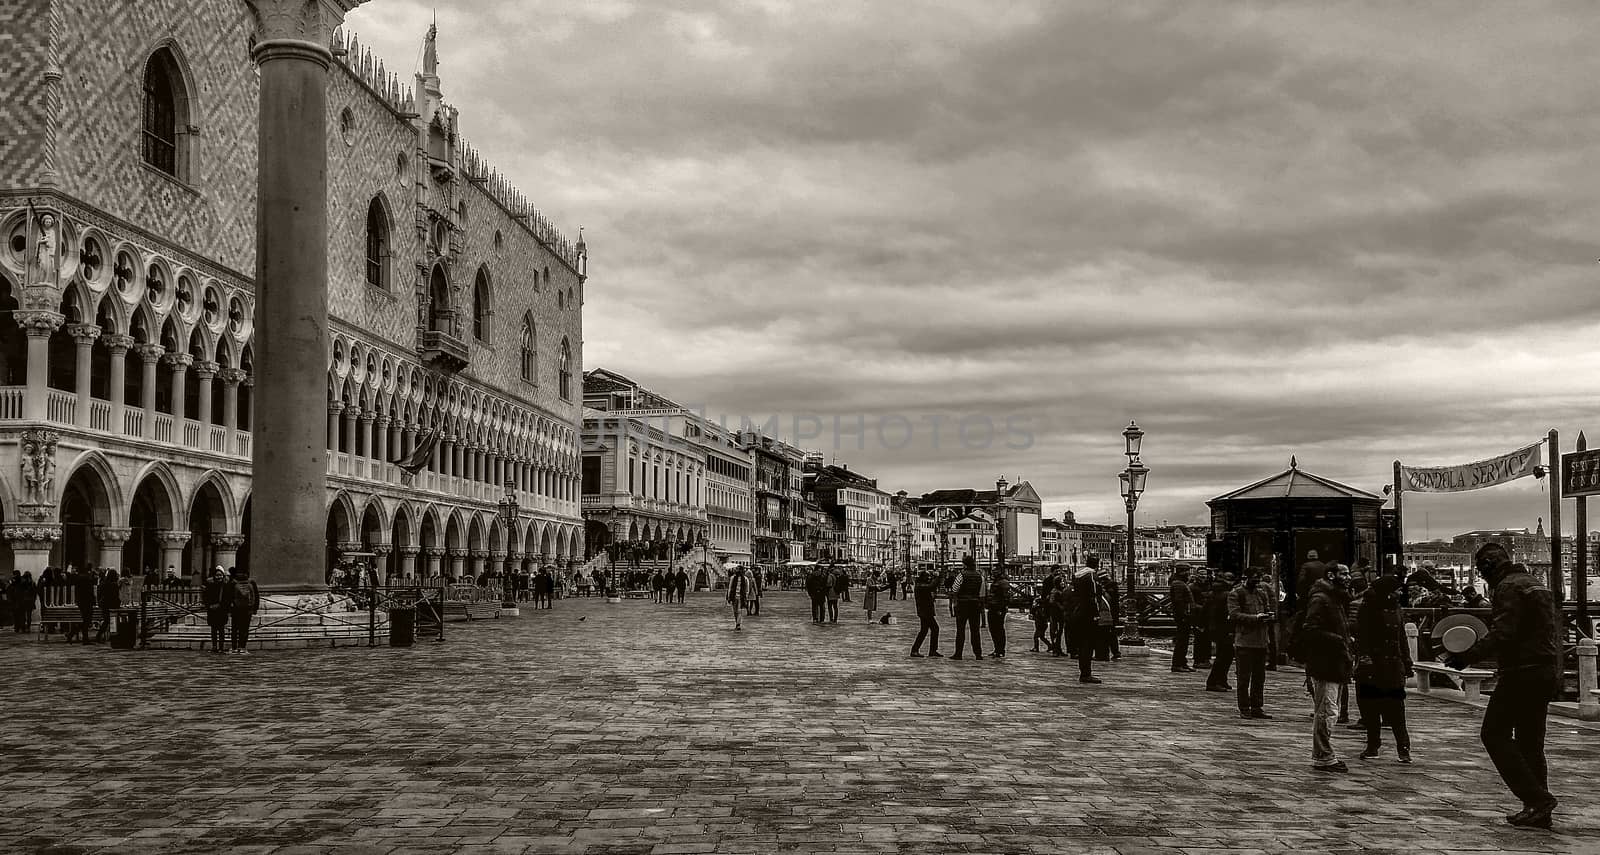 San Marco square in Venice by pippocarlot